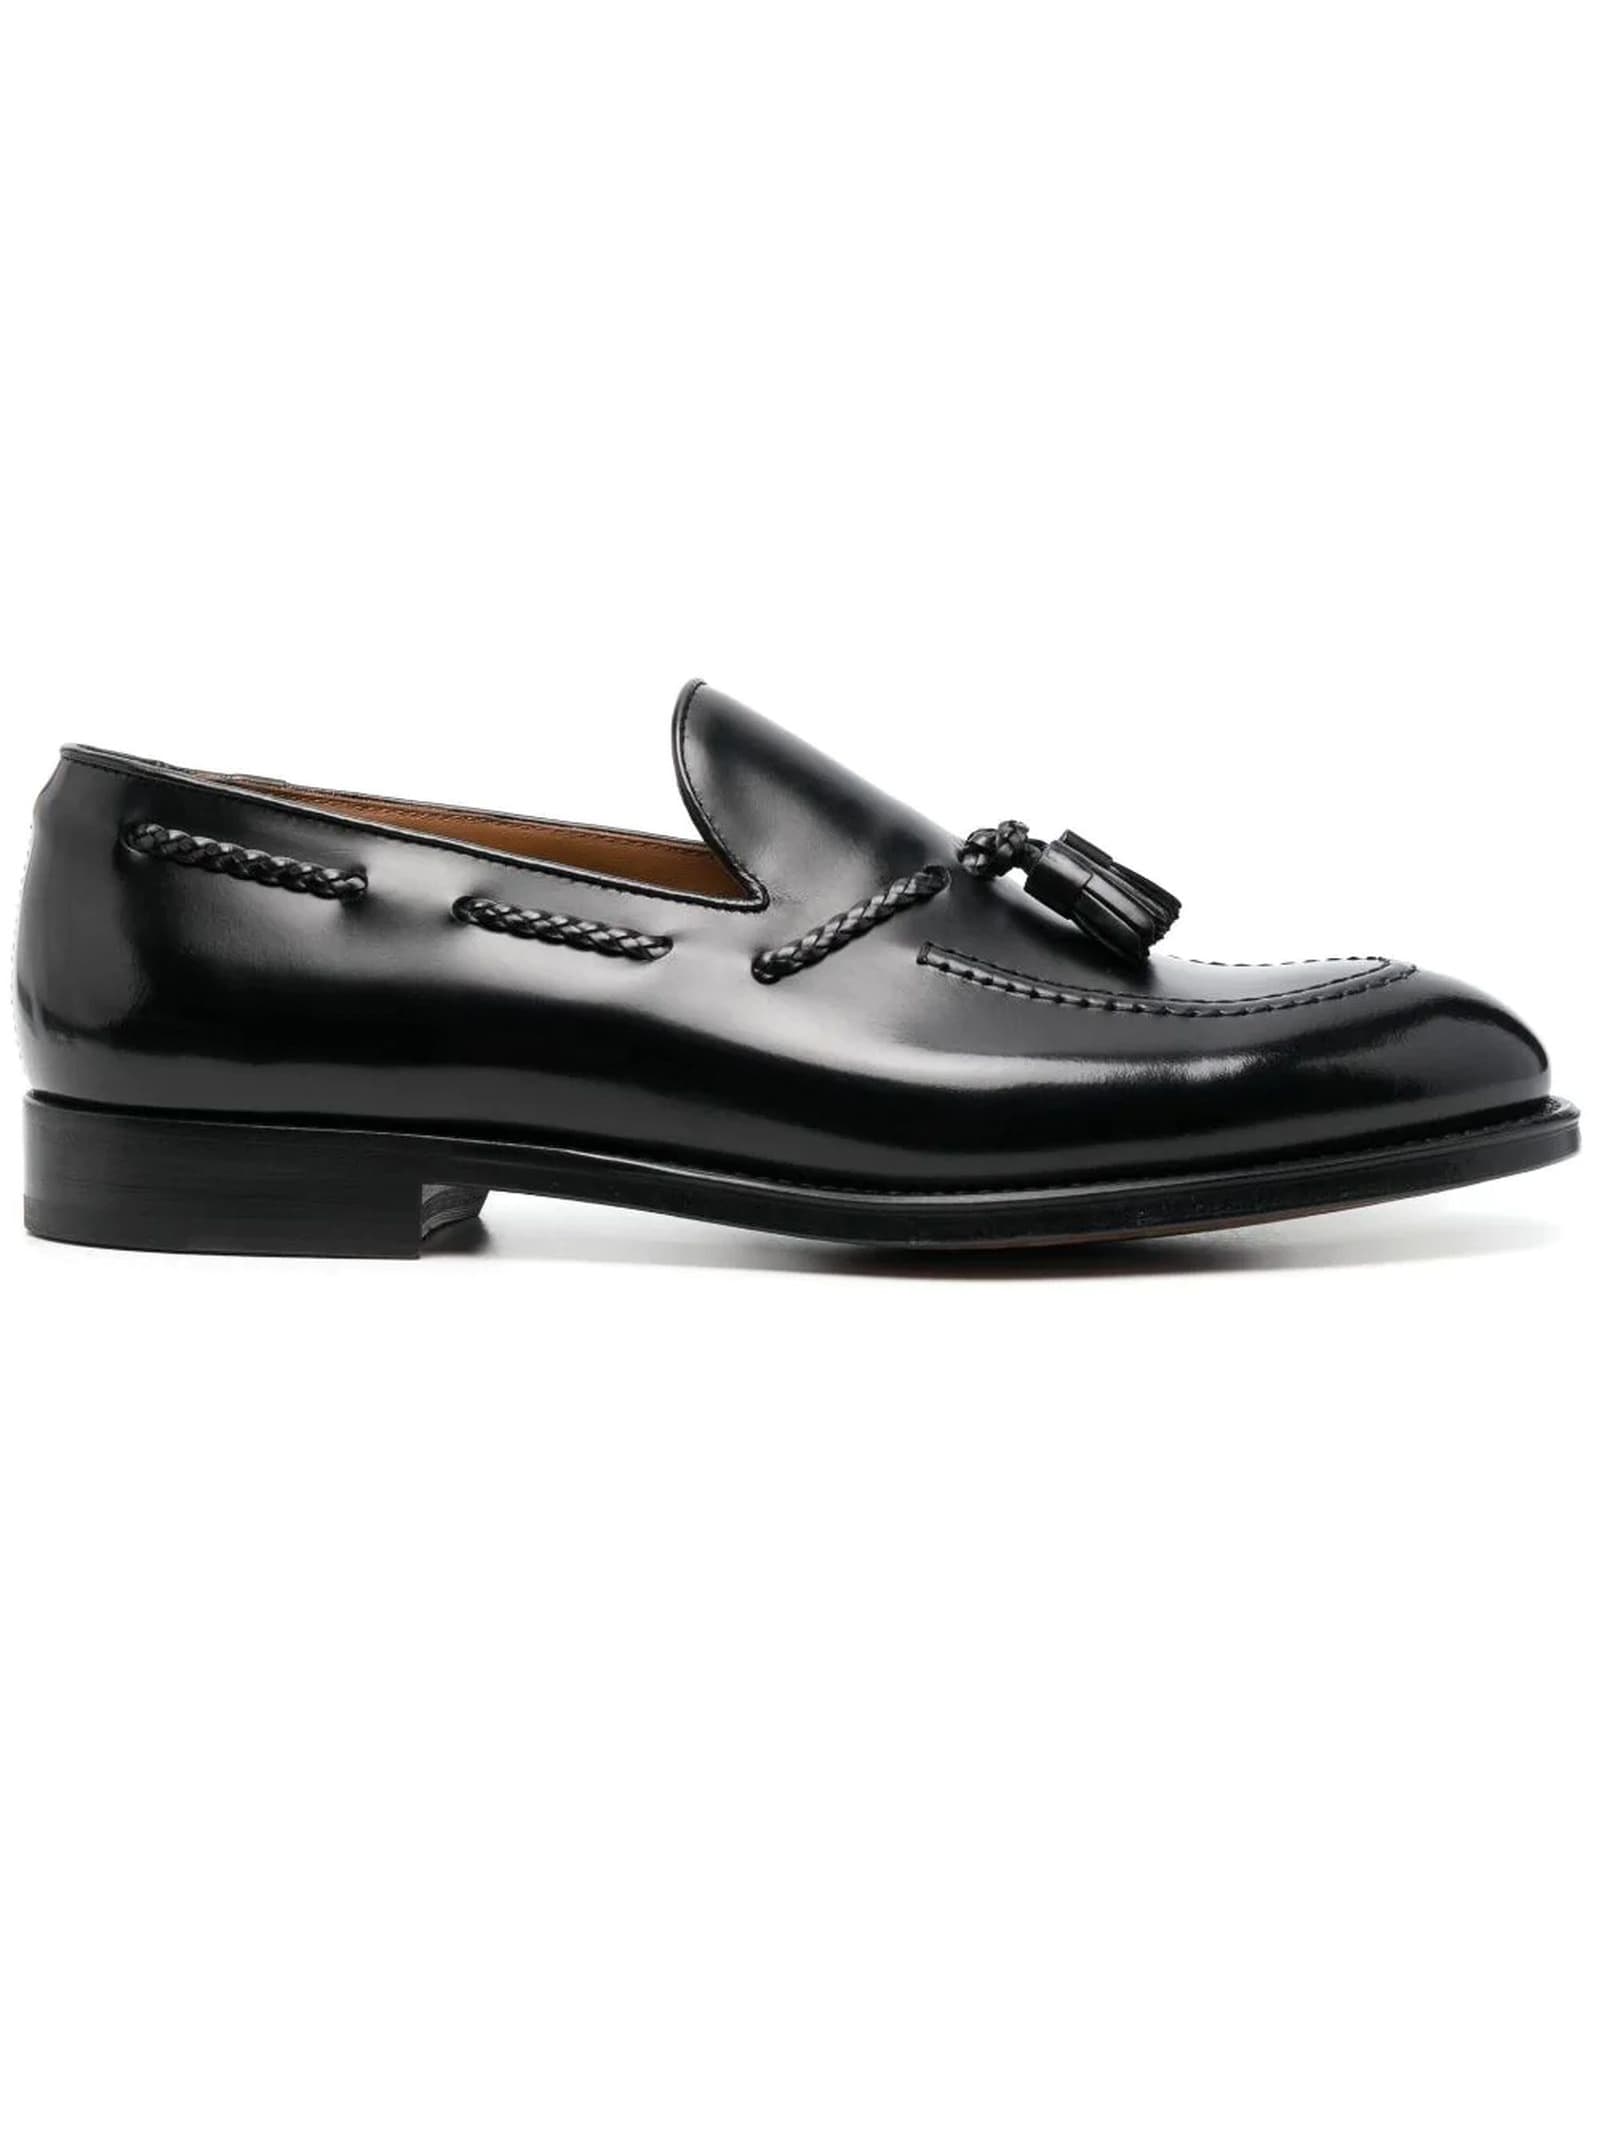 Black Calf Leather Loafers